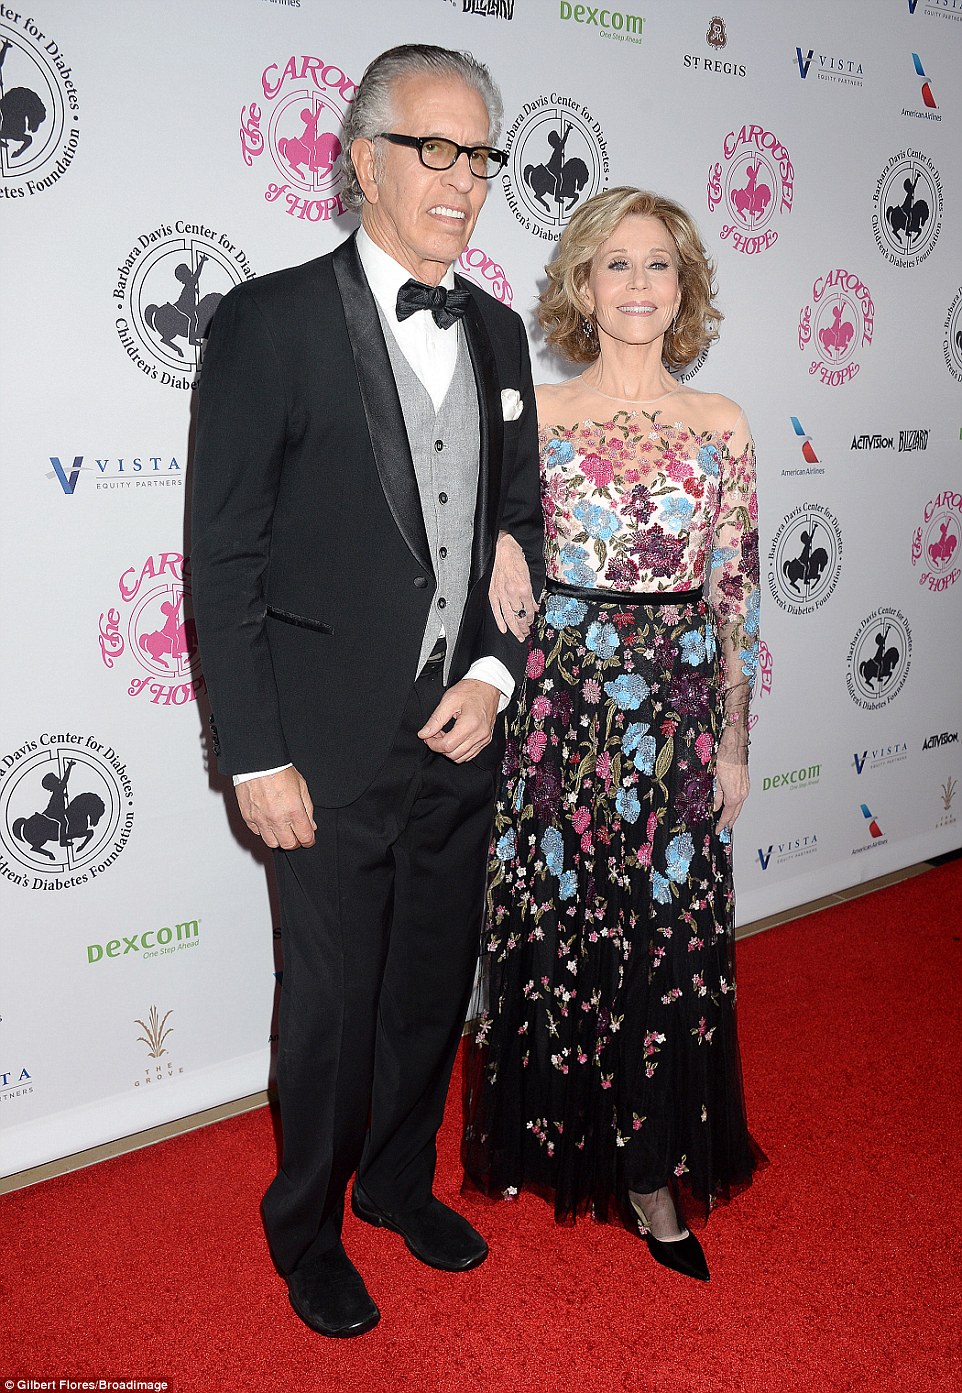 Jane Fonda arrived on the arm of 74-year-old music producer Richard Perry